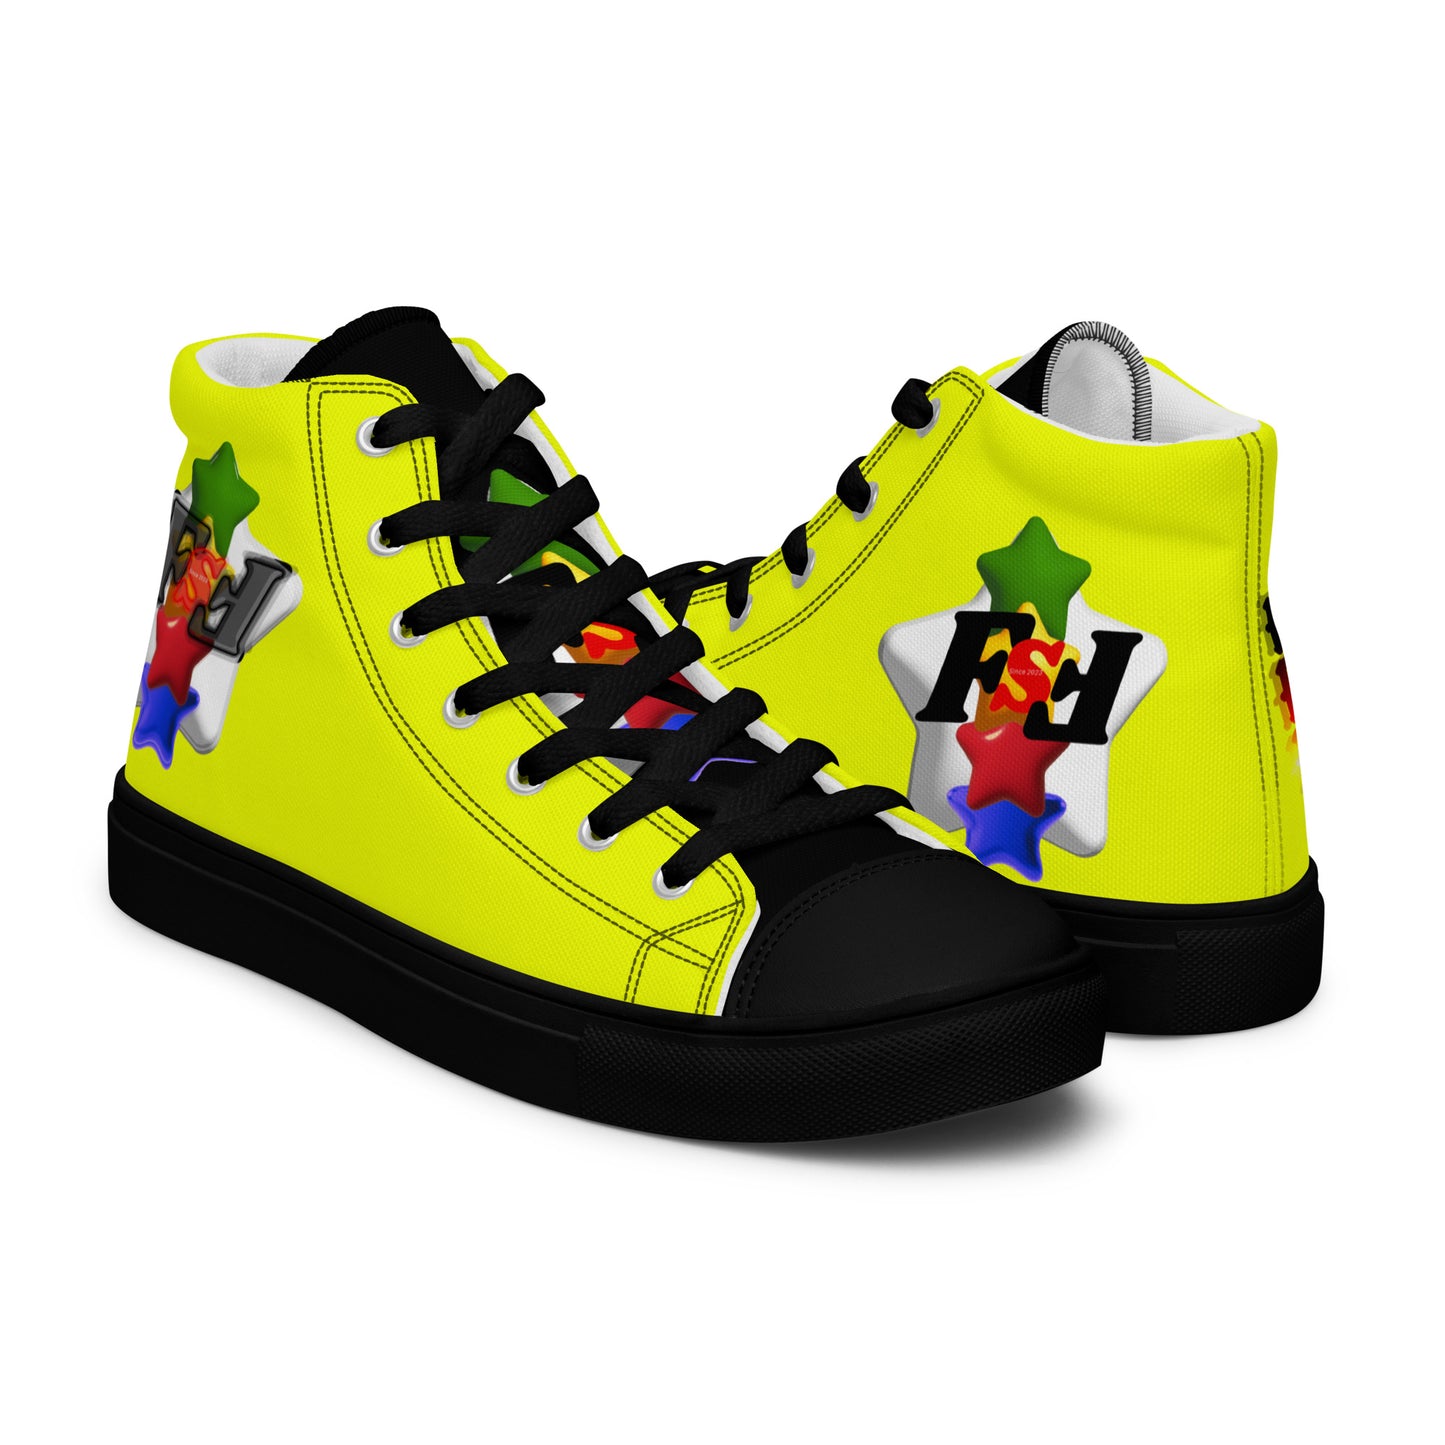 Men’s high top canvas shoes - FSF Stacked 'White Star' Yellow